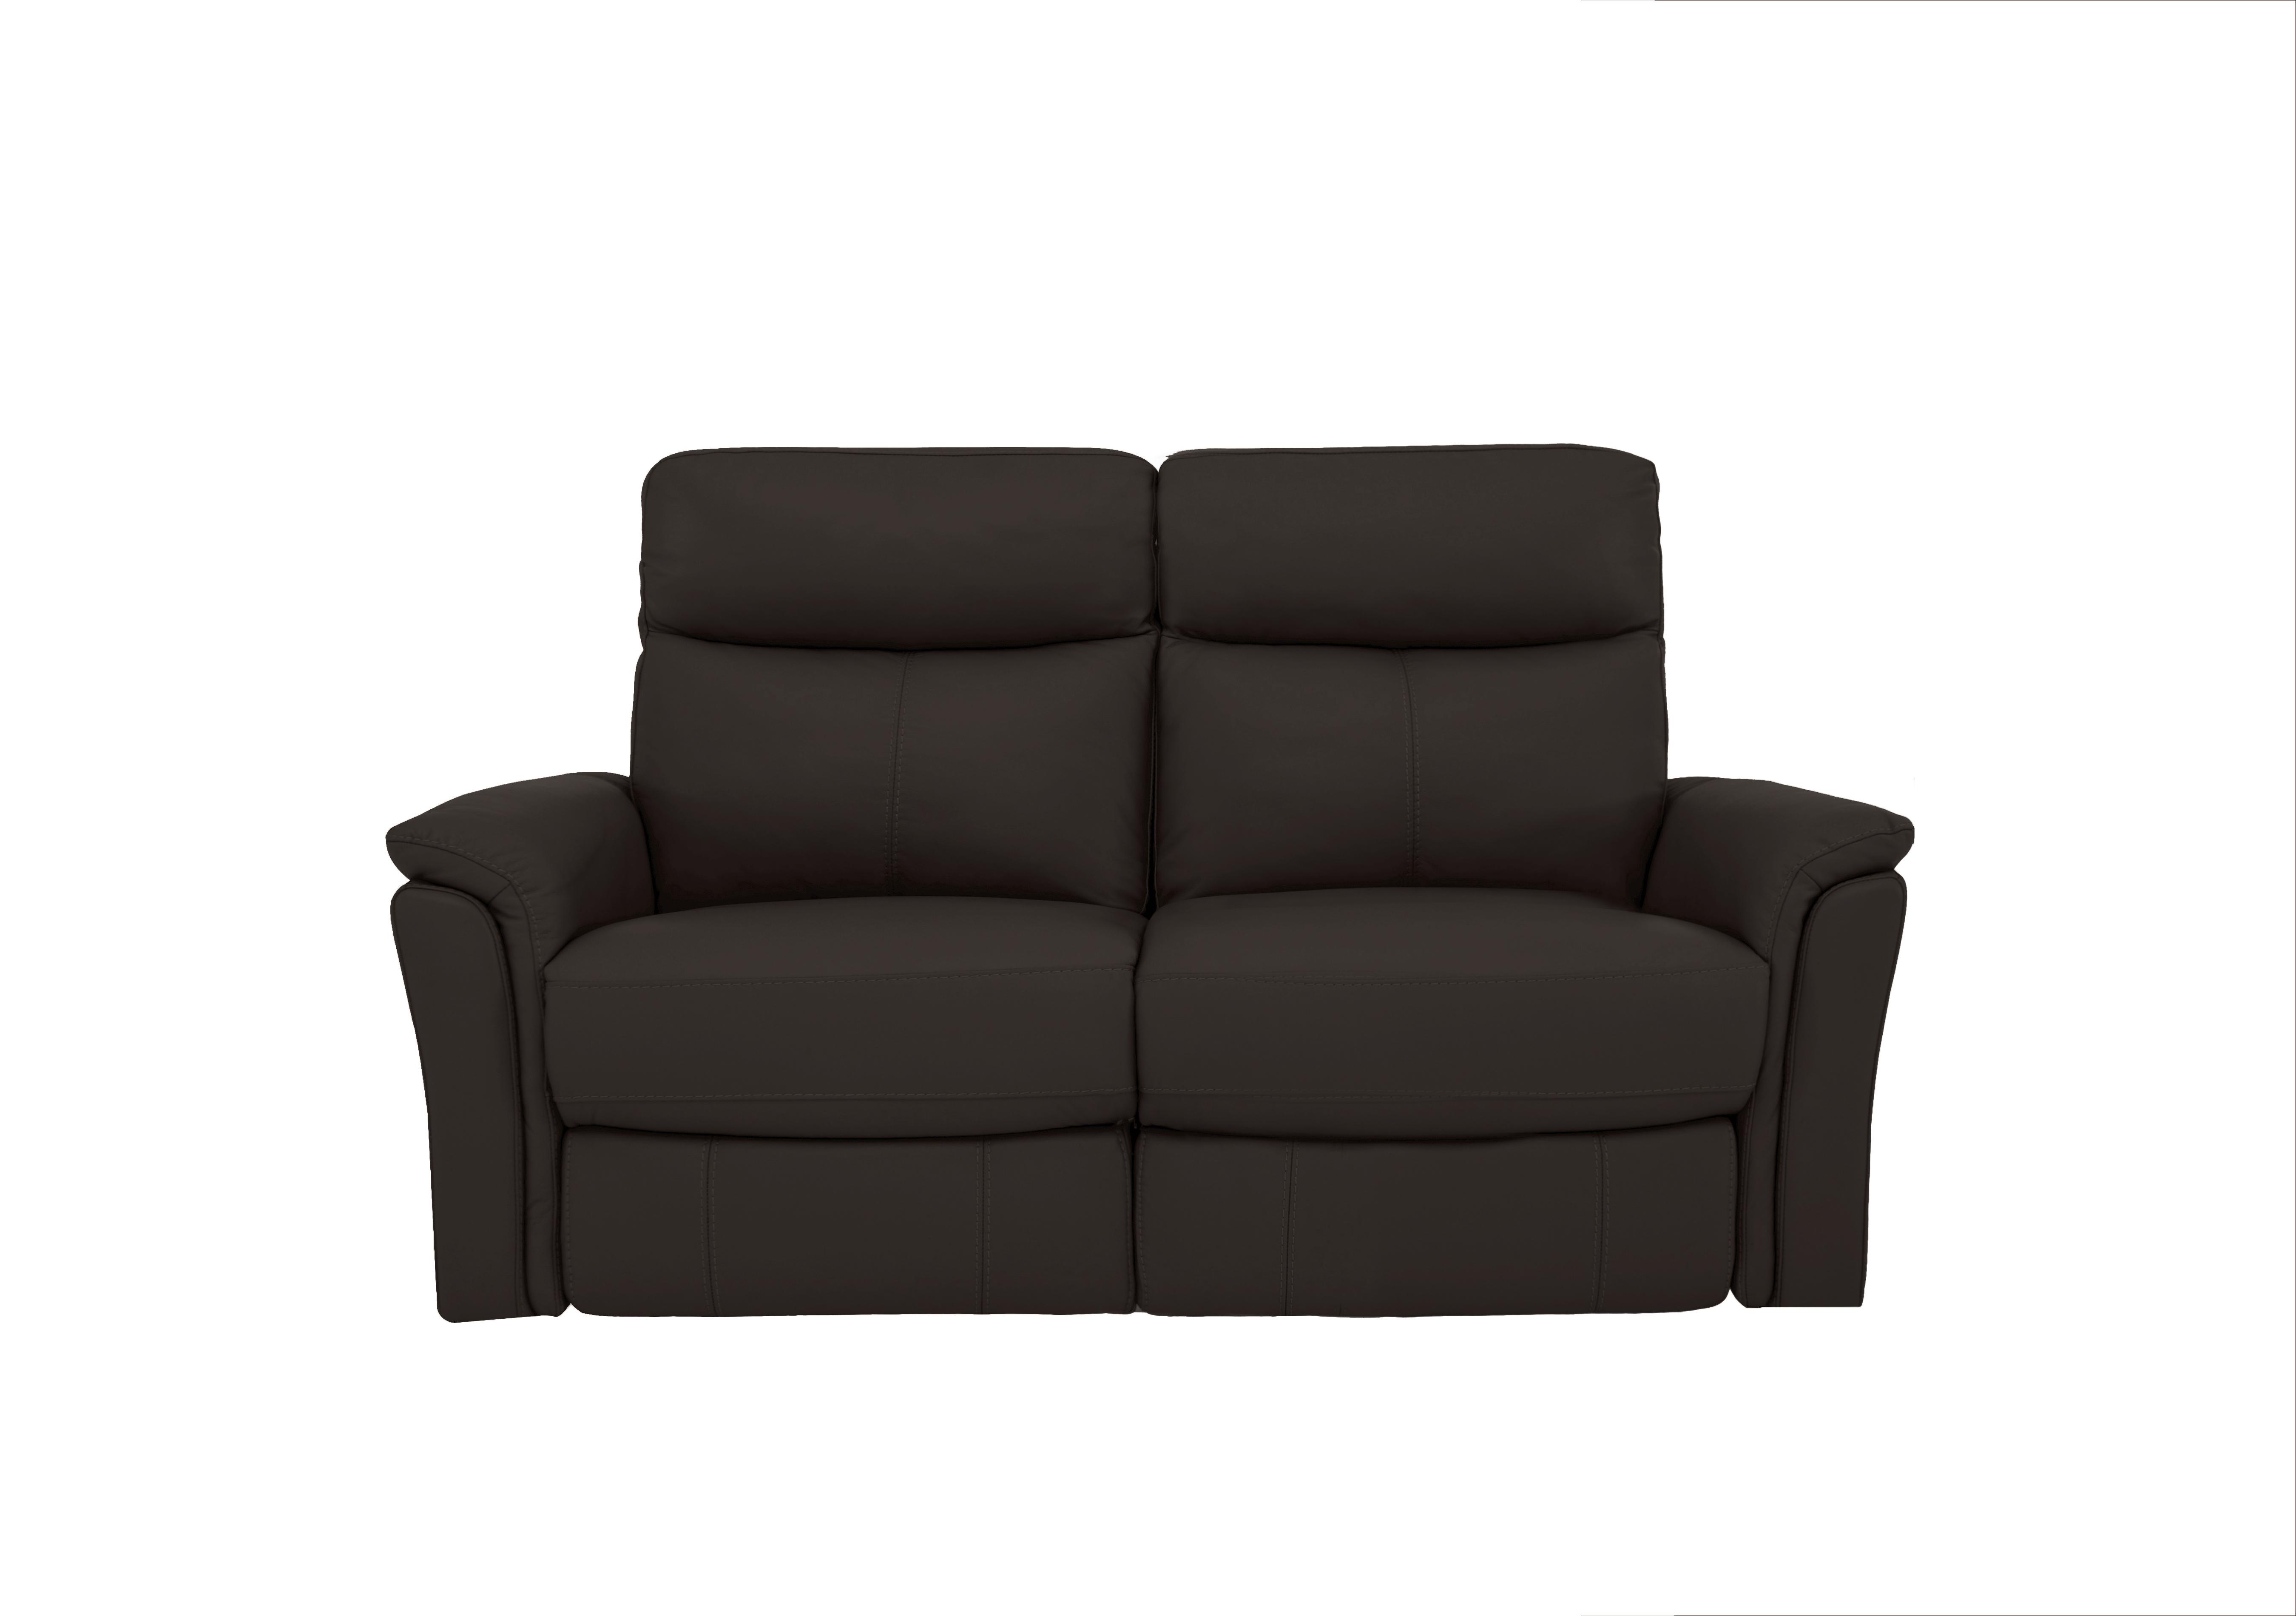 Compact Collection Piccolo 2 Seater Sofa in Bv-1748 Dark Chocolate on Furniture Village